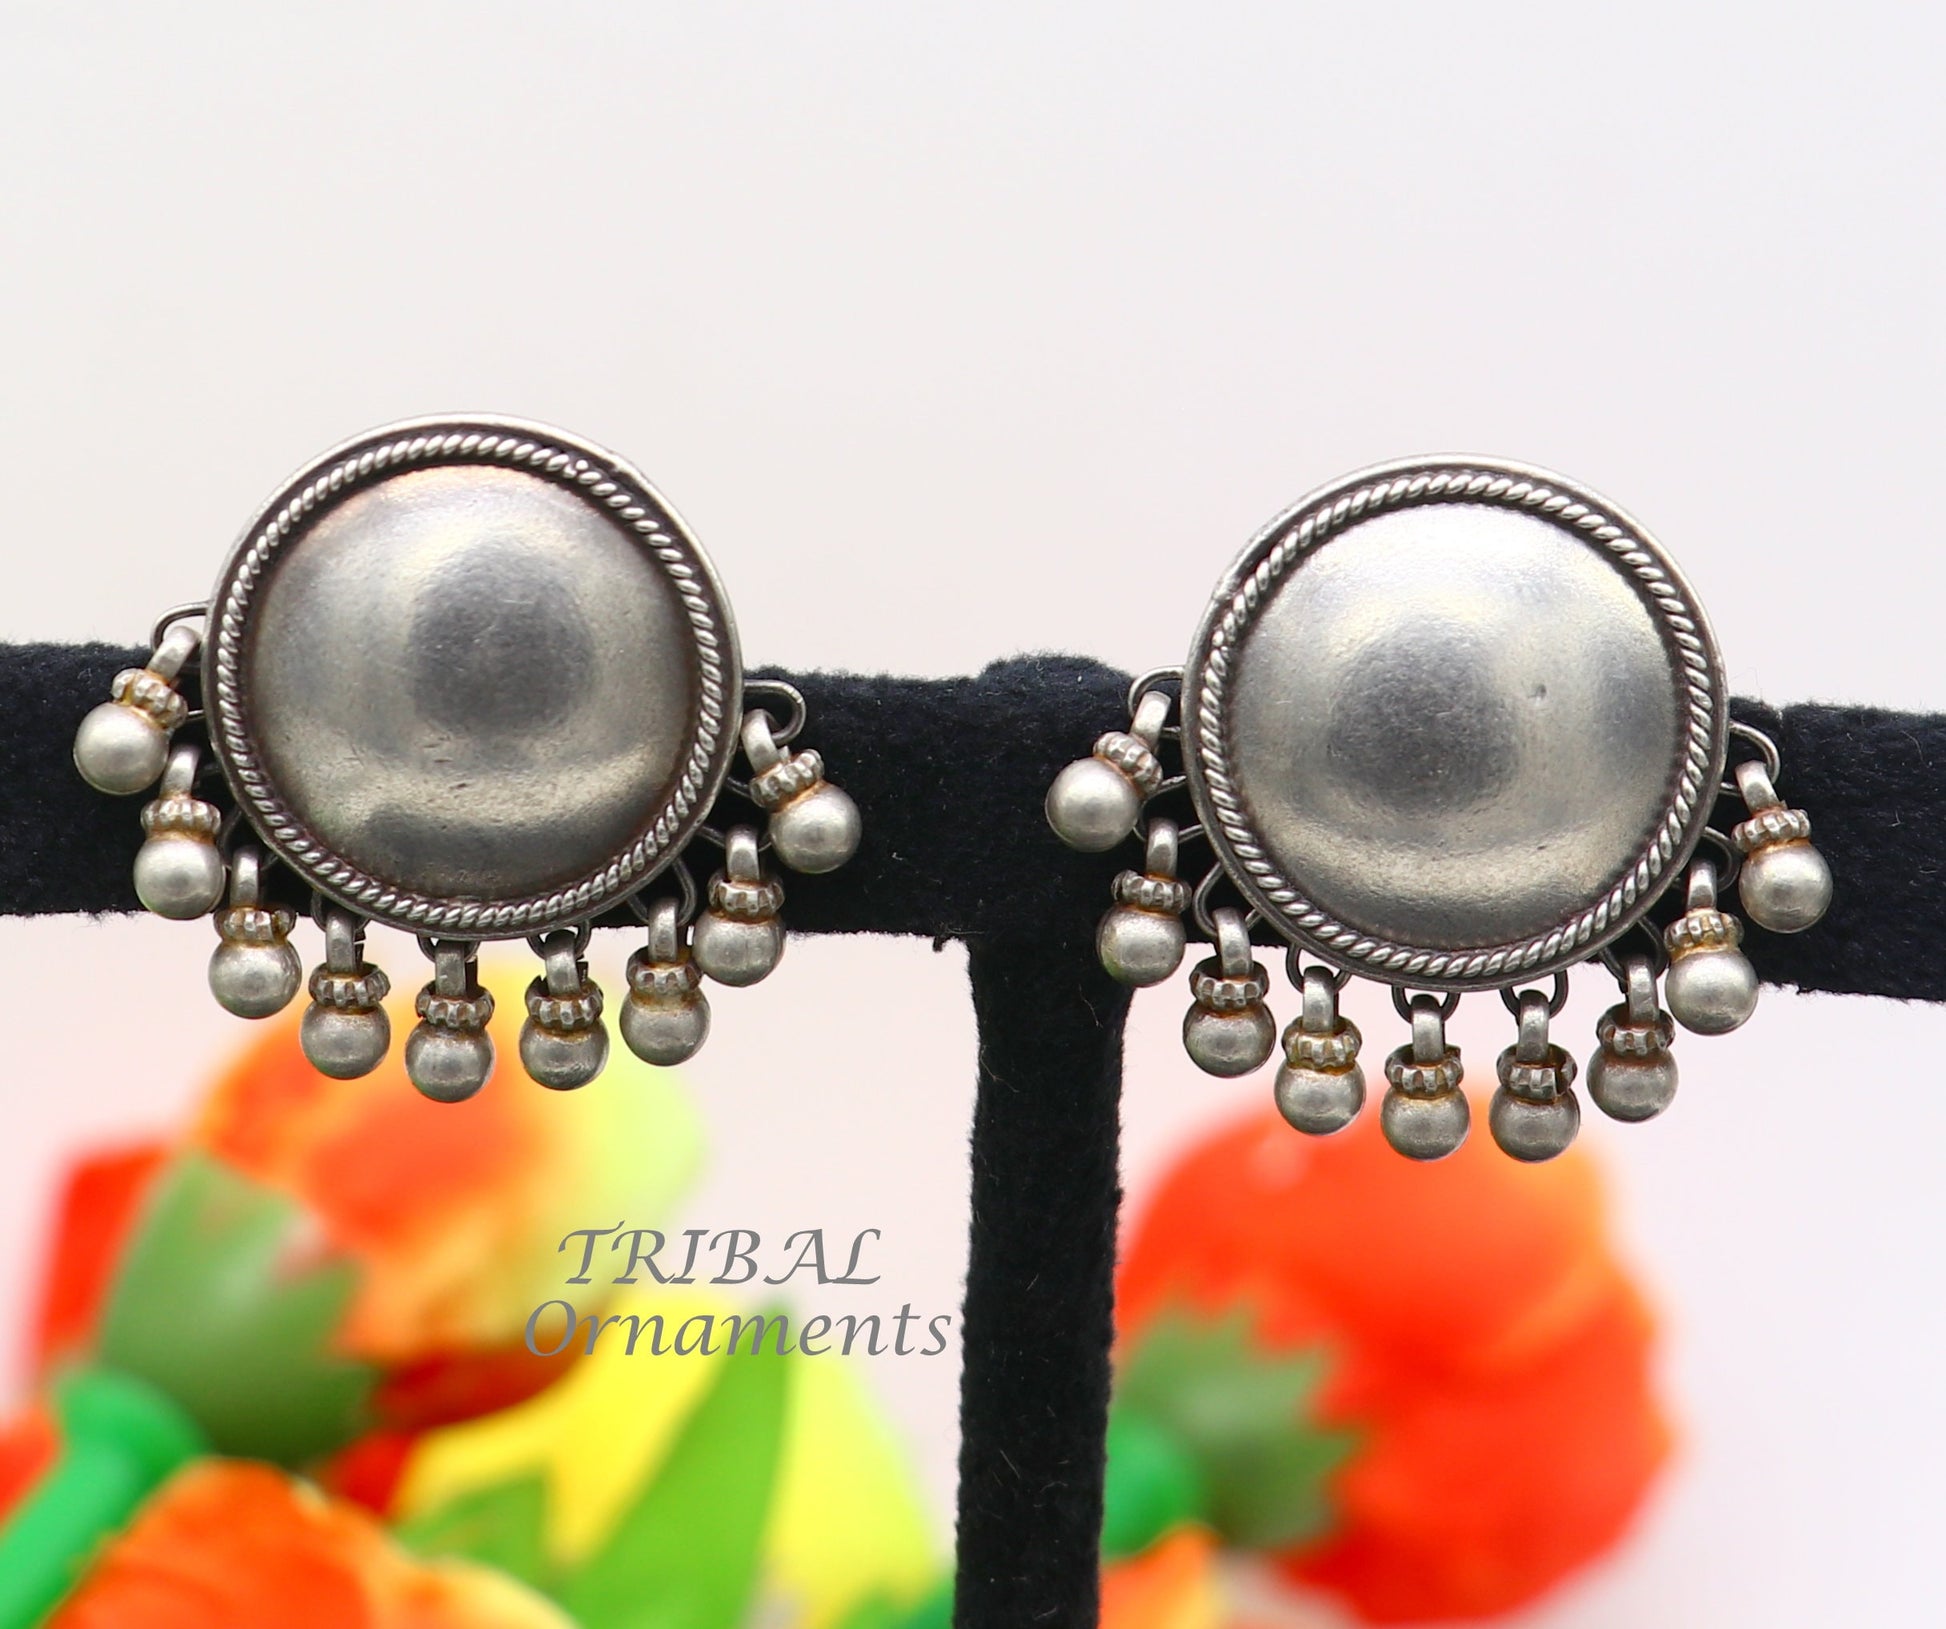 Vintage design 925 sterling silver plain style handmade round design fabulous Stud earrings tribal jewelry from Rajasthan india  s1103 - TRIBAL ORNAMENTS